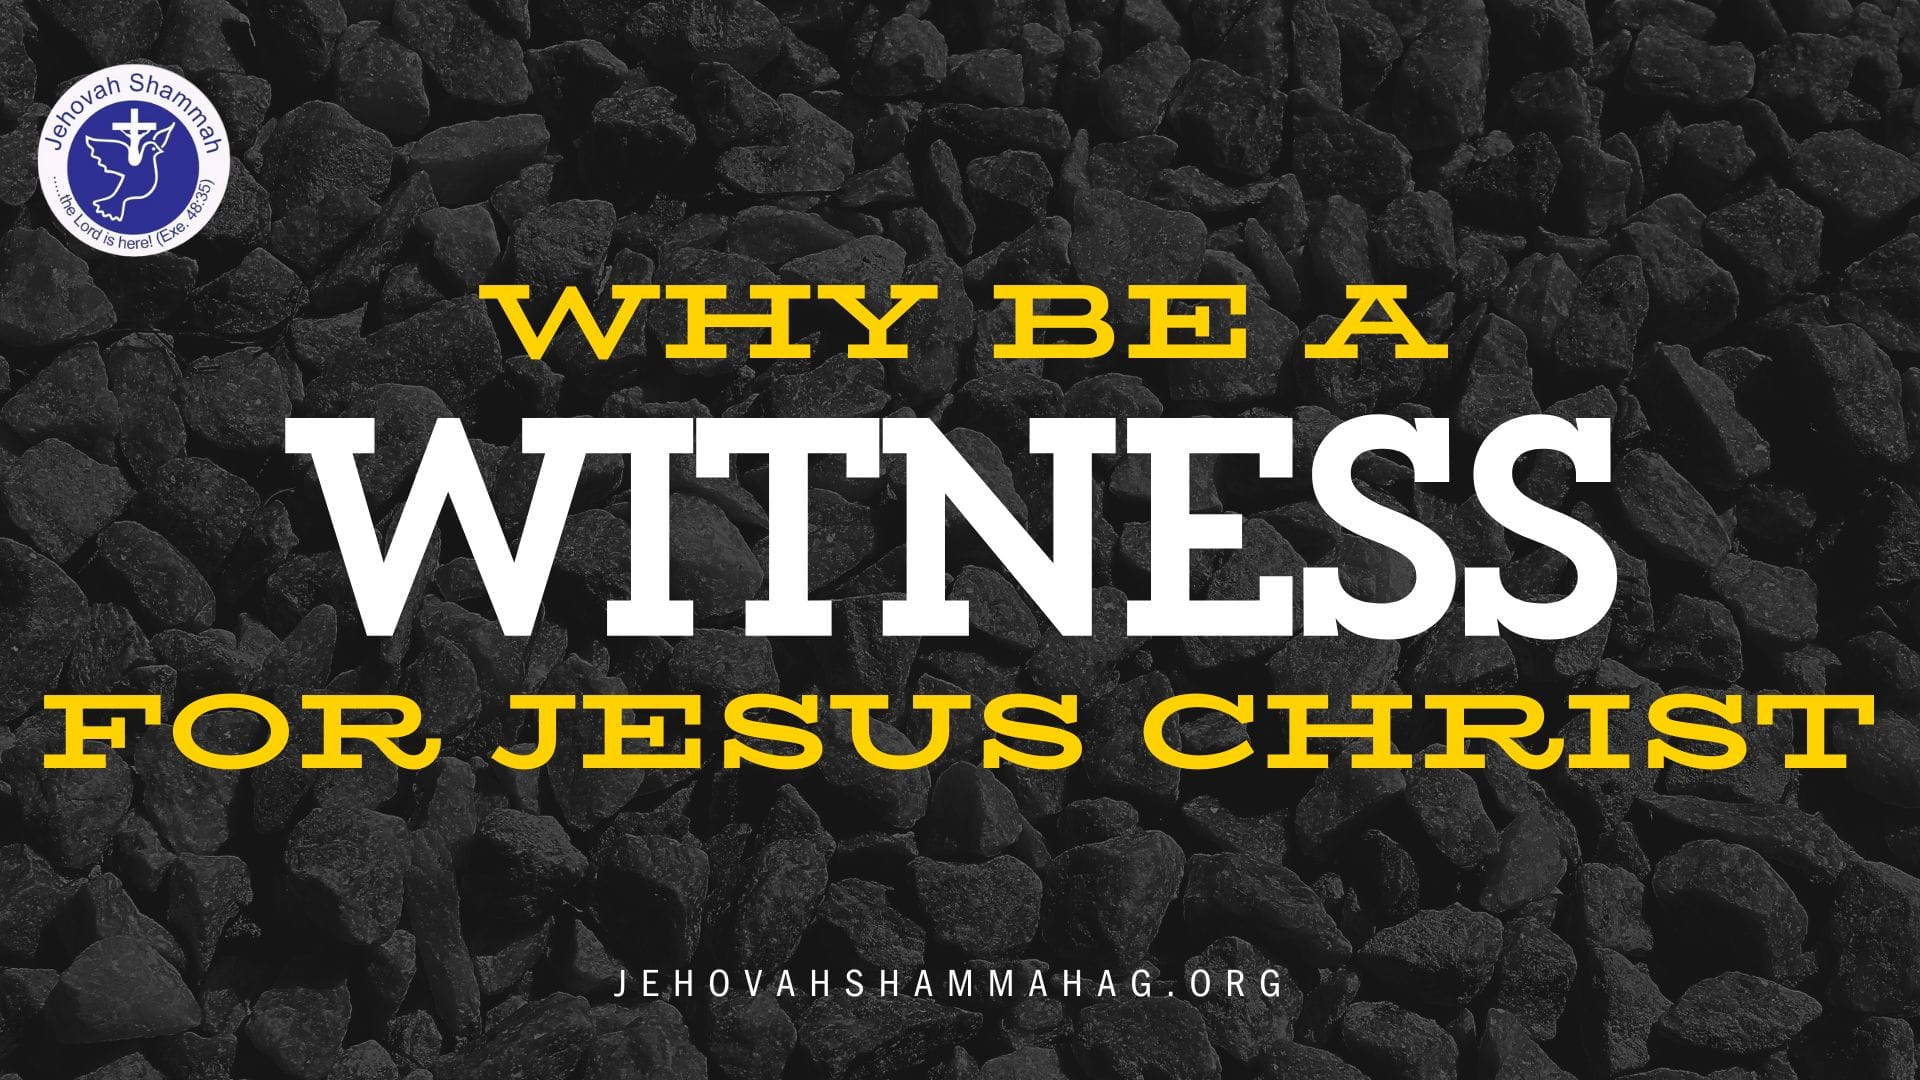 WHY BE A WITNESS FOR JESUS CHRIST